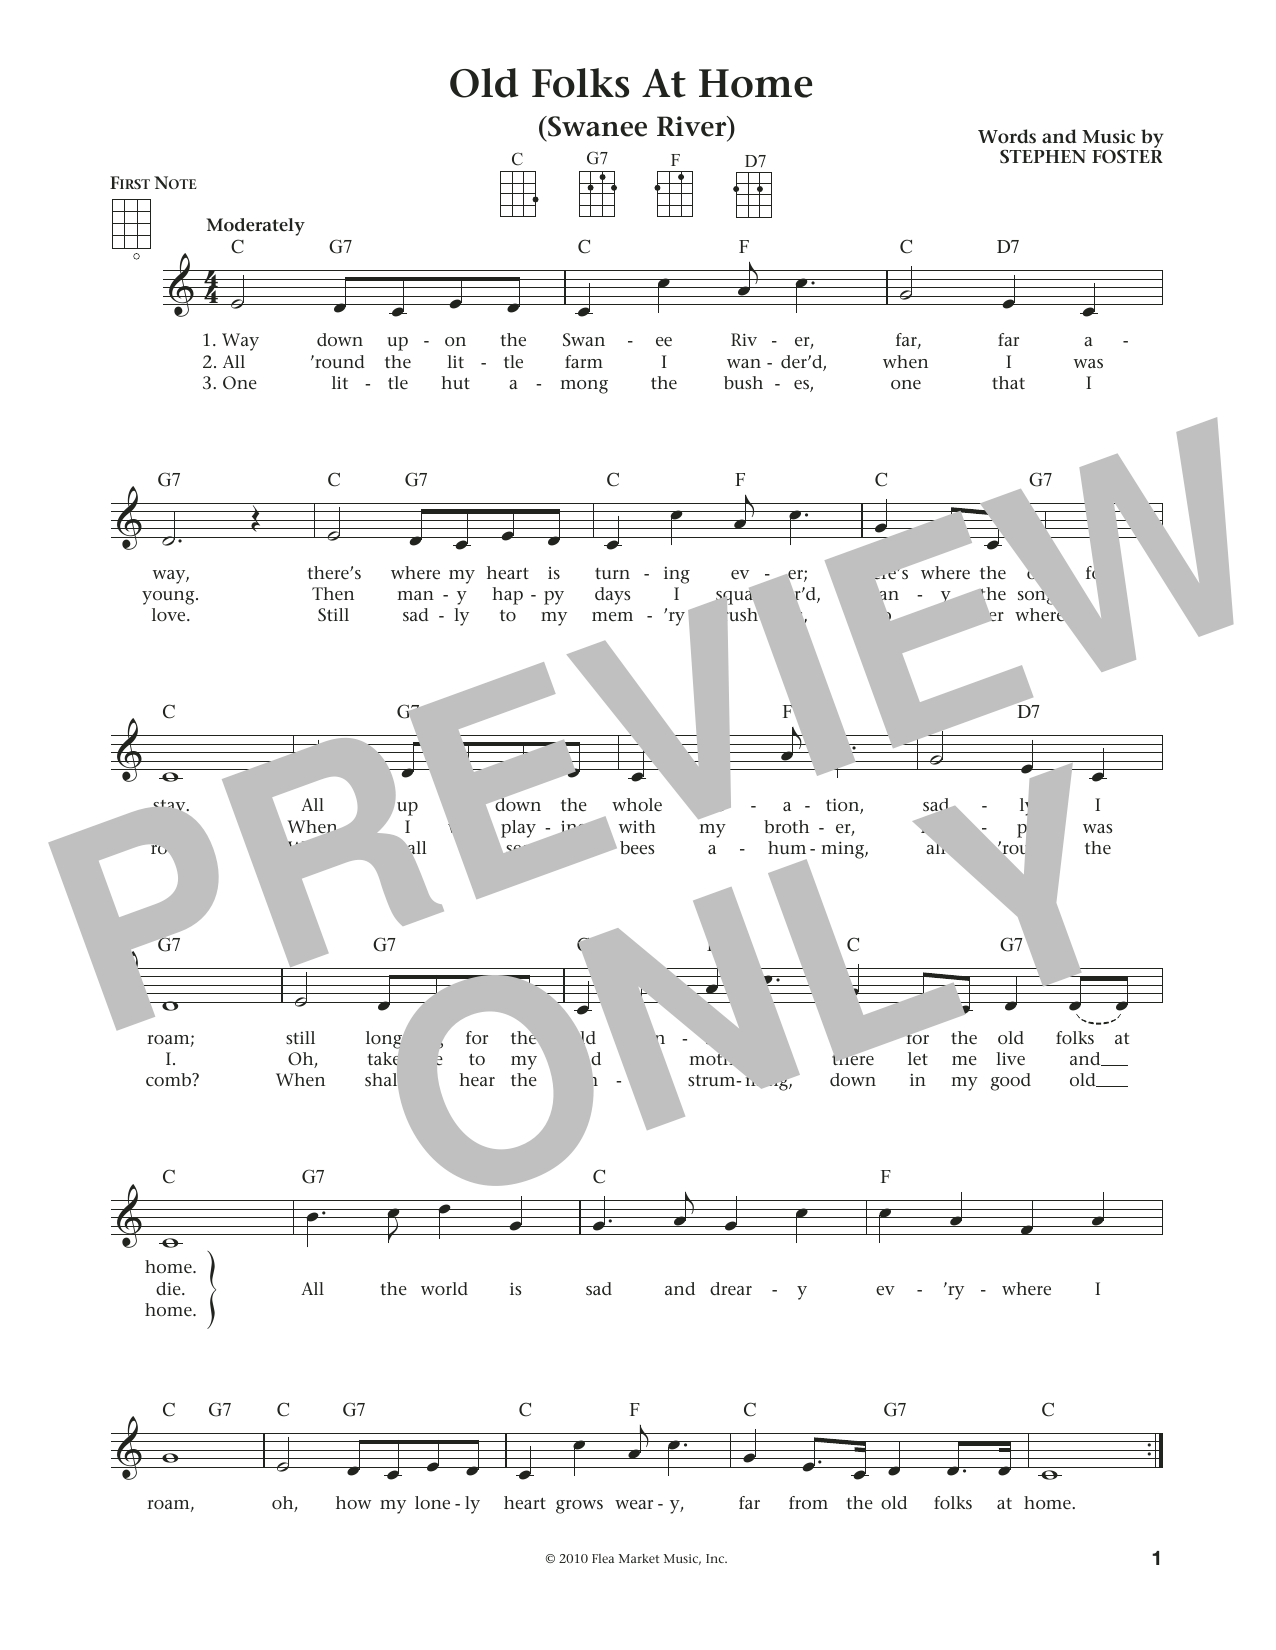 Download Stephen C. Foster Old Folks At Home (Swanee River) (from Sheet Music